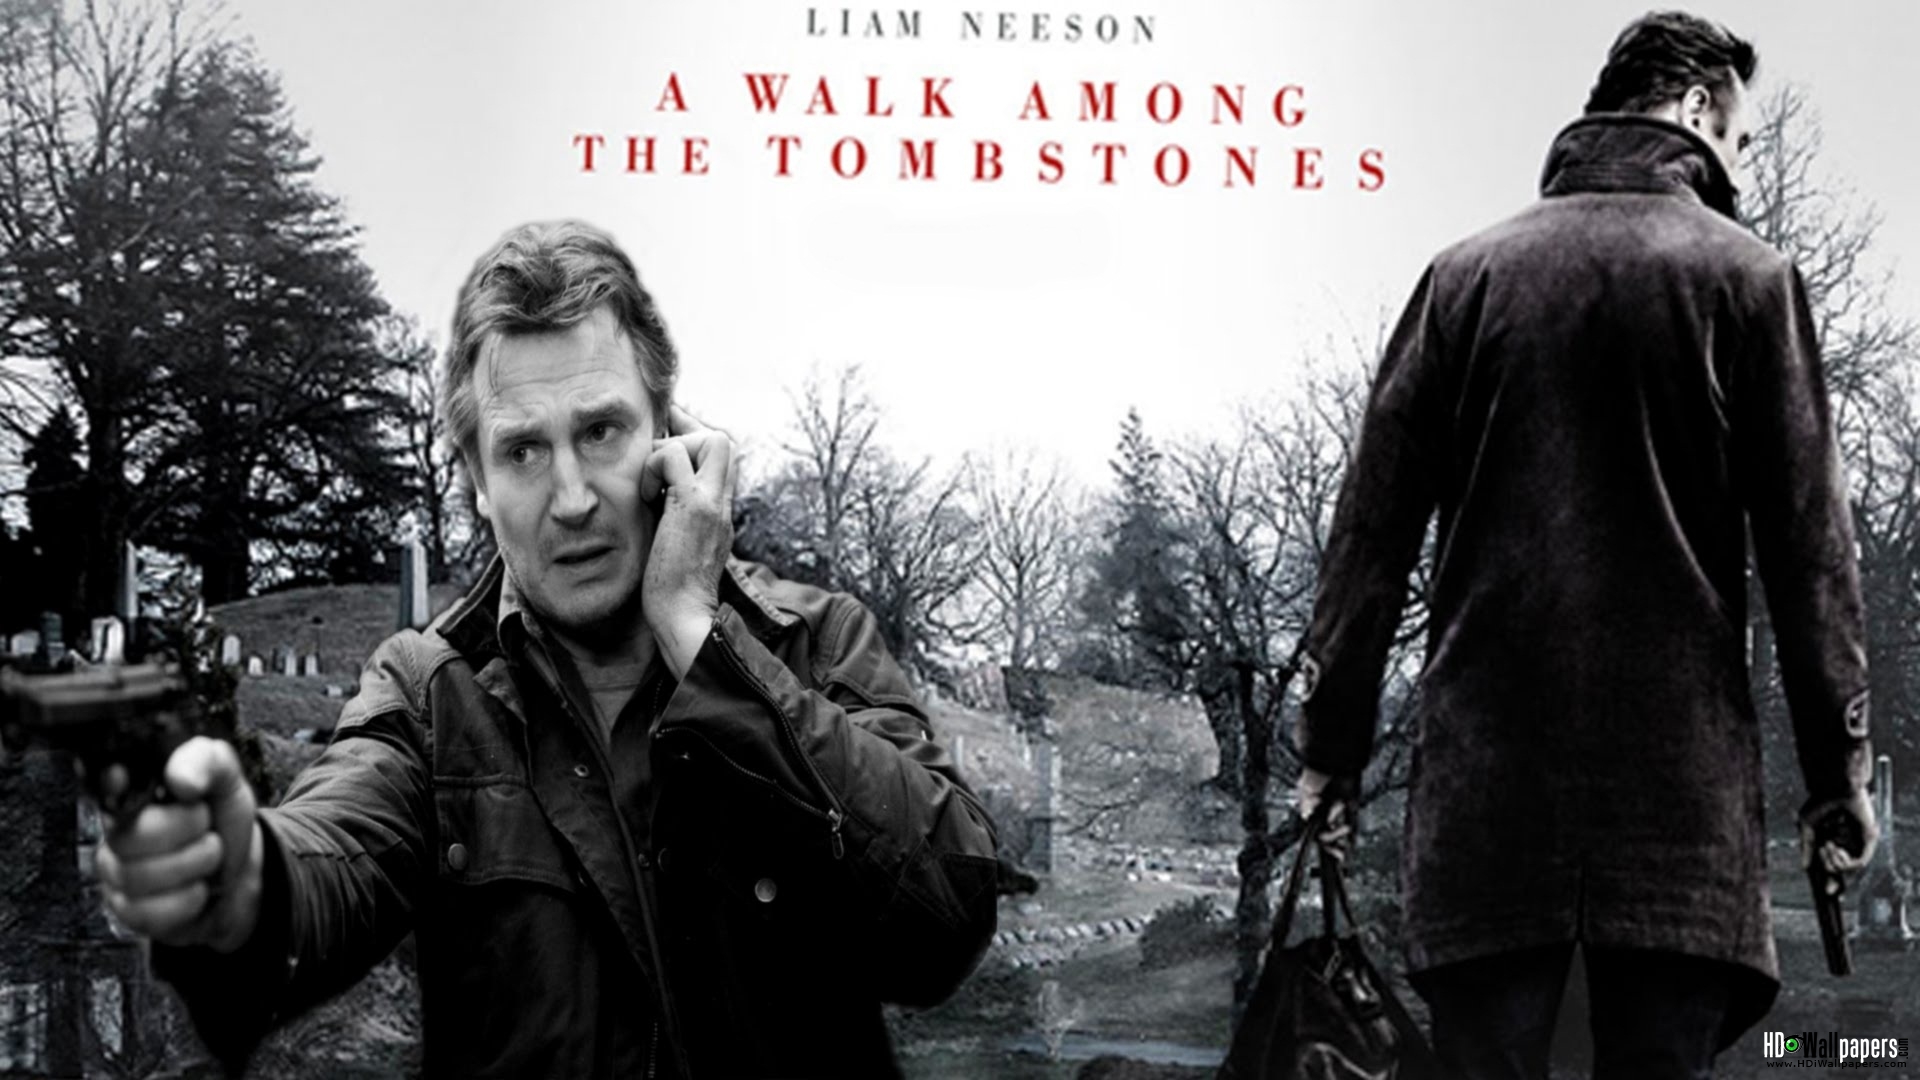 A-Walk-Among-The-Tombstones-Movie-2014-HD-Wallpapers-02